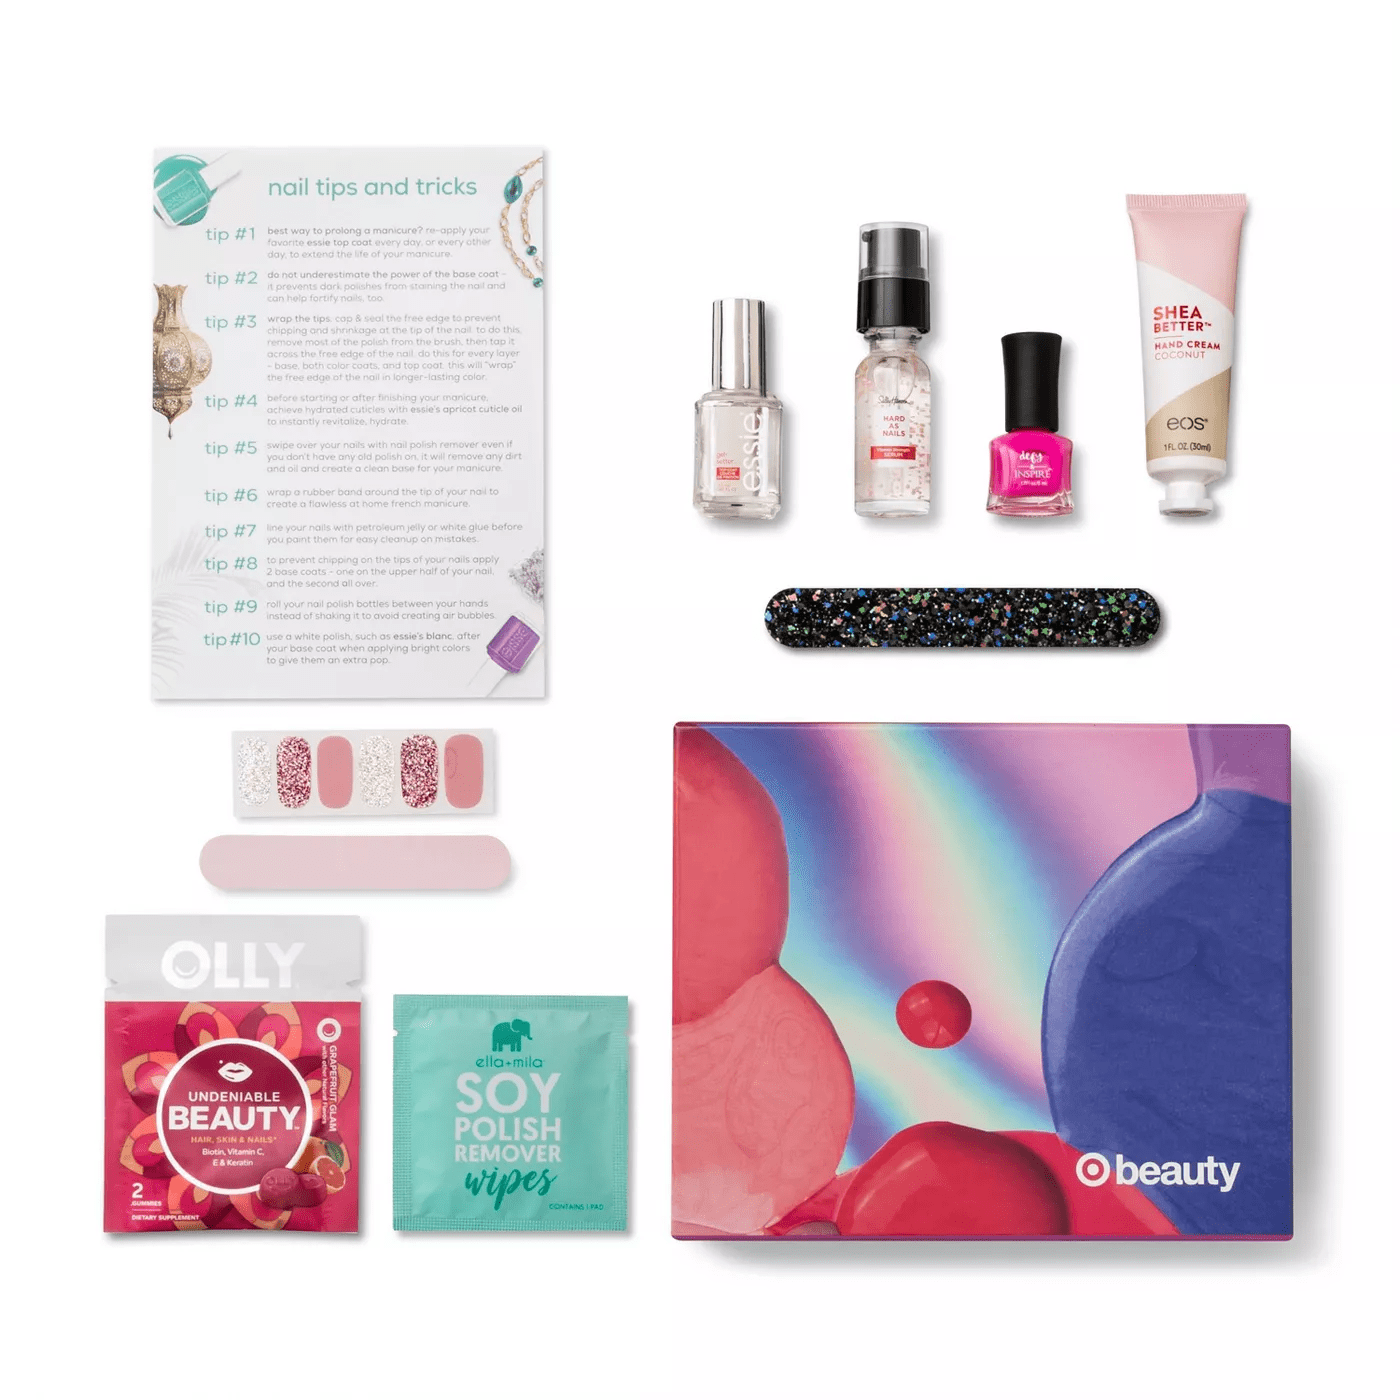 June 2020 Target Beauty Box Available Now - $7 Shipped ...